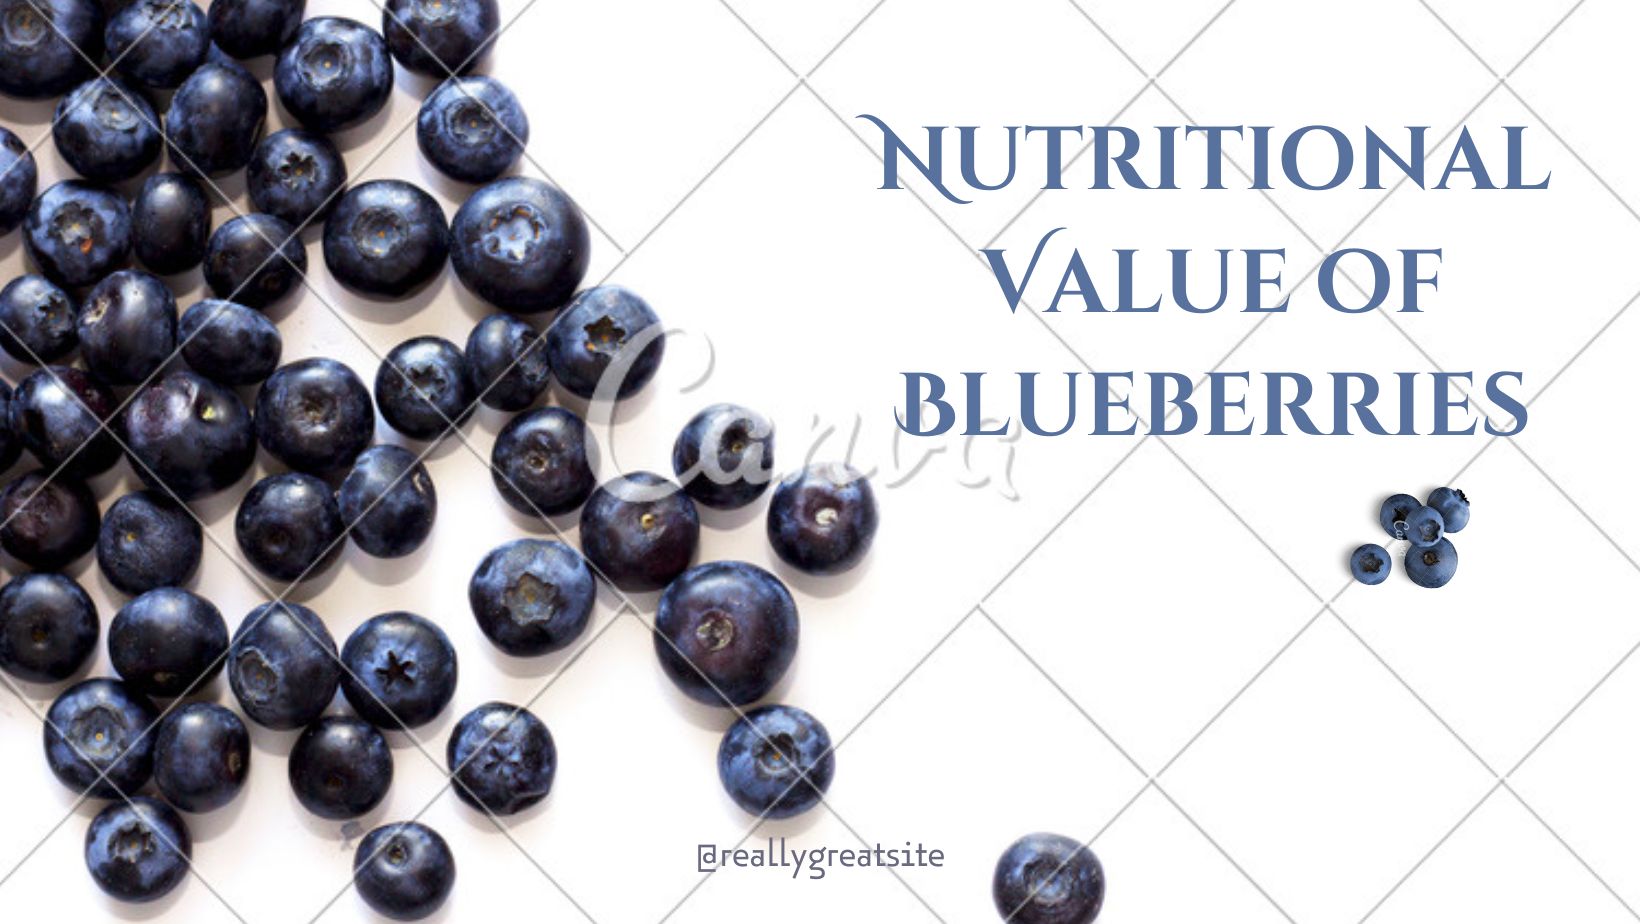 Nutritional Value of Blueberries